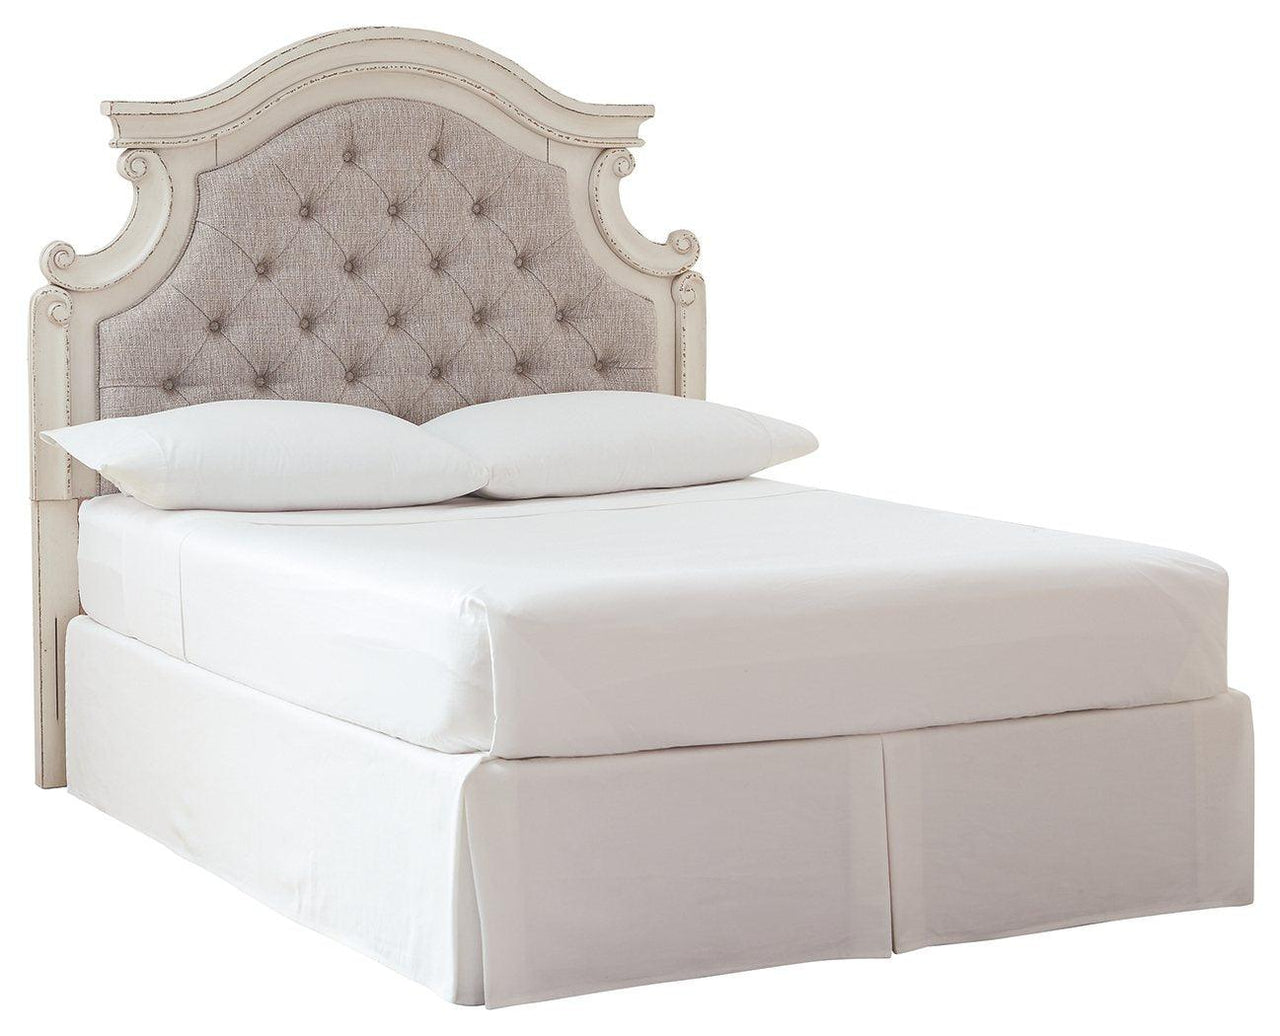 Realyn - Chipped White - Full Uph Panel Headboard Tony's Home Furnishings Furniture. Beds. Dressers. Sofas.